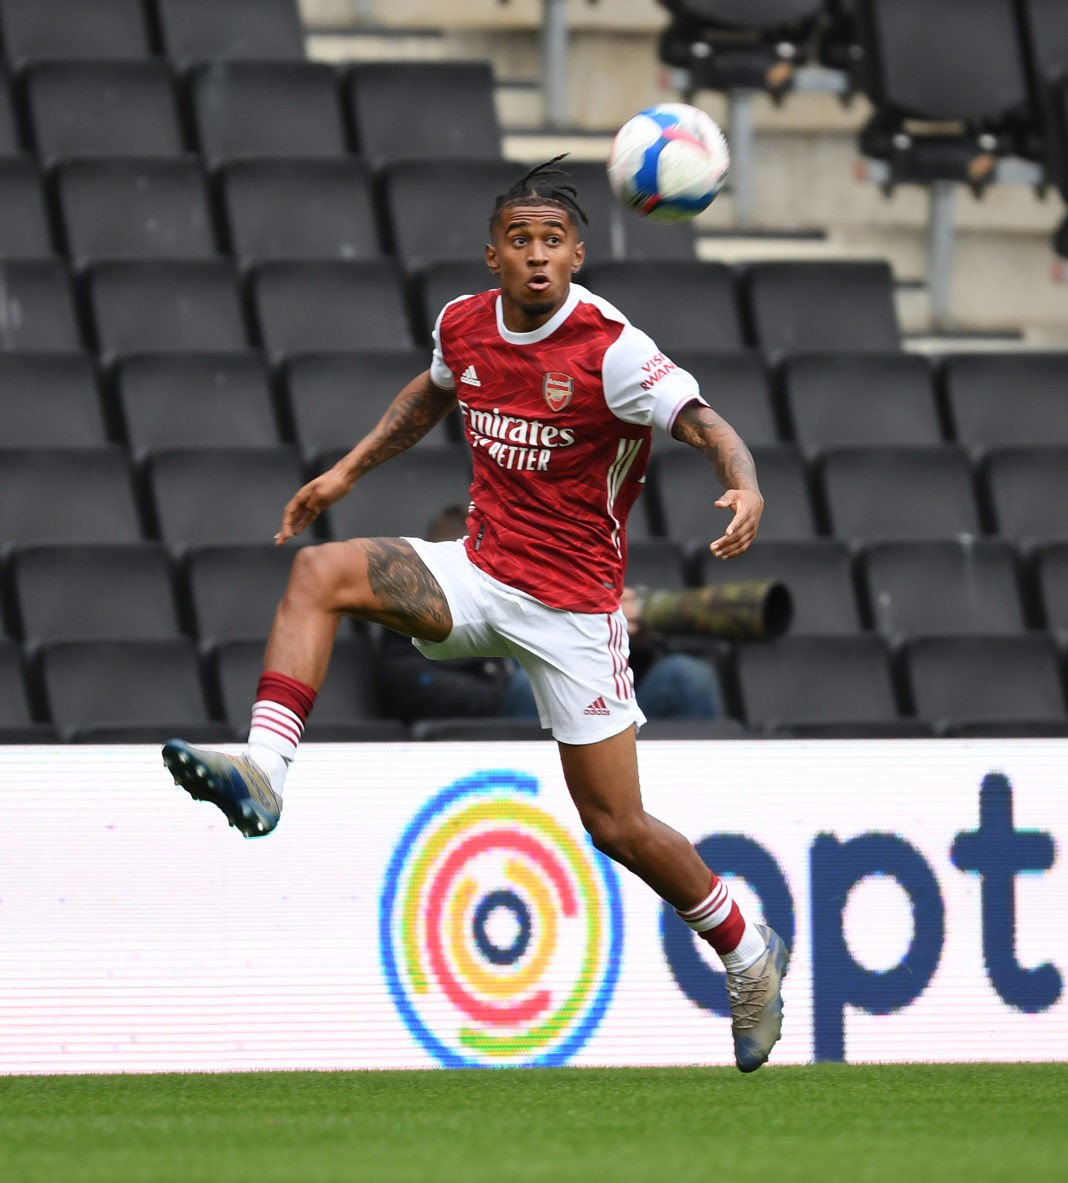 Reiss Nelson in a friendly against MK Dons (Photo via Arsenal Academy on Twitter)